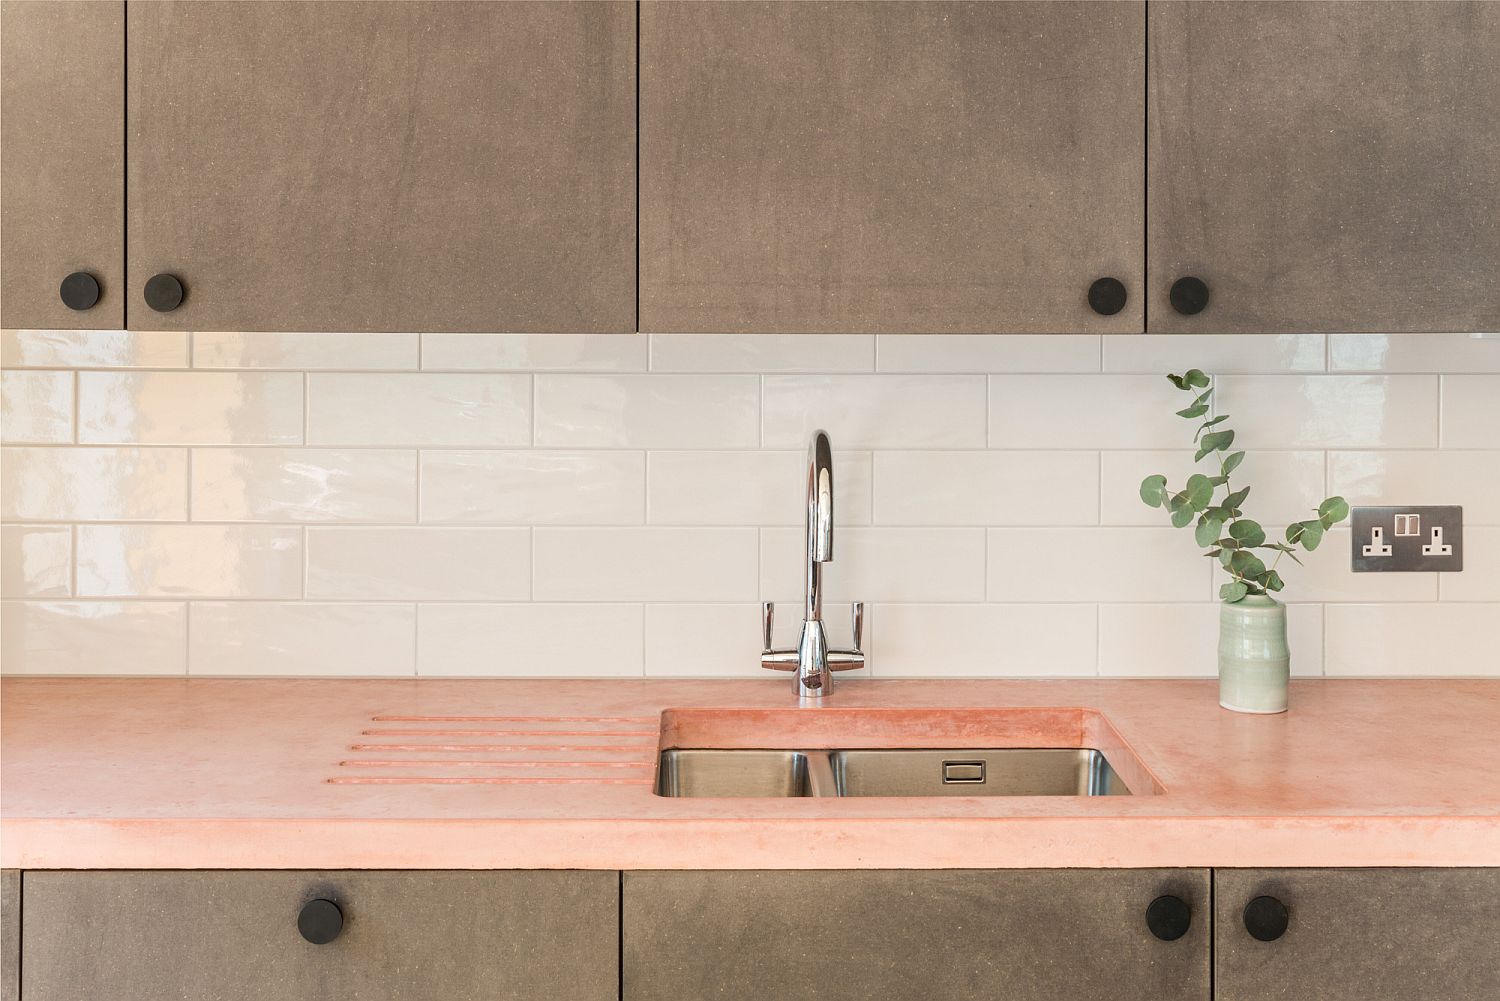 Pink countertops in the kitchen paint a unique and bold picture